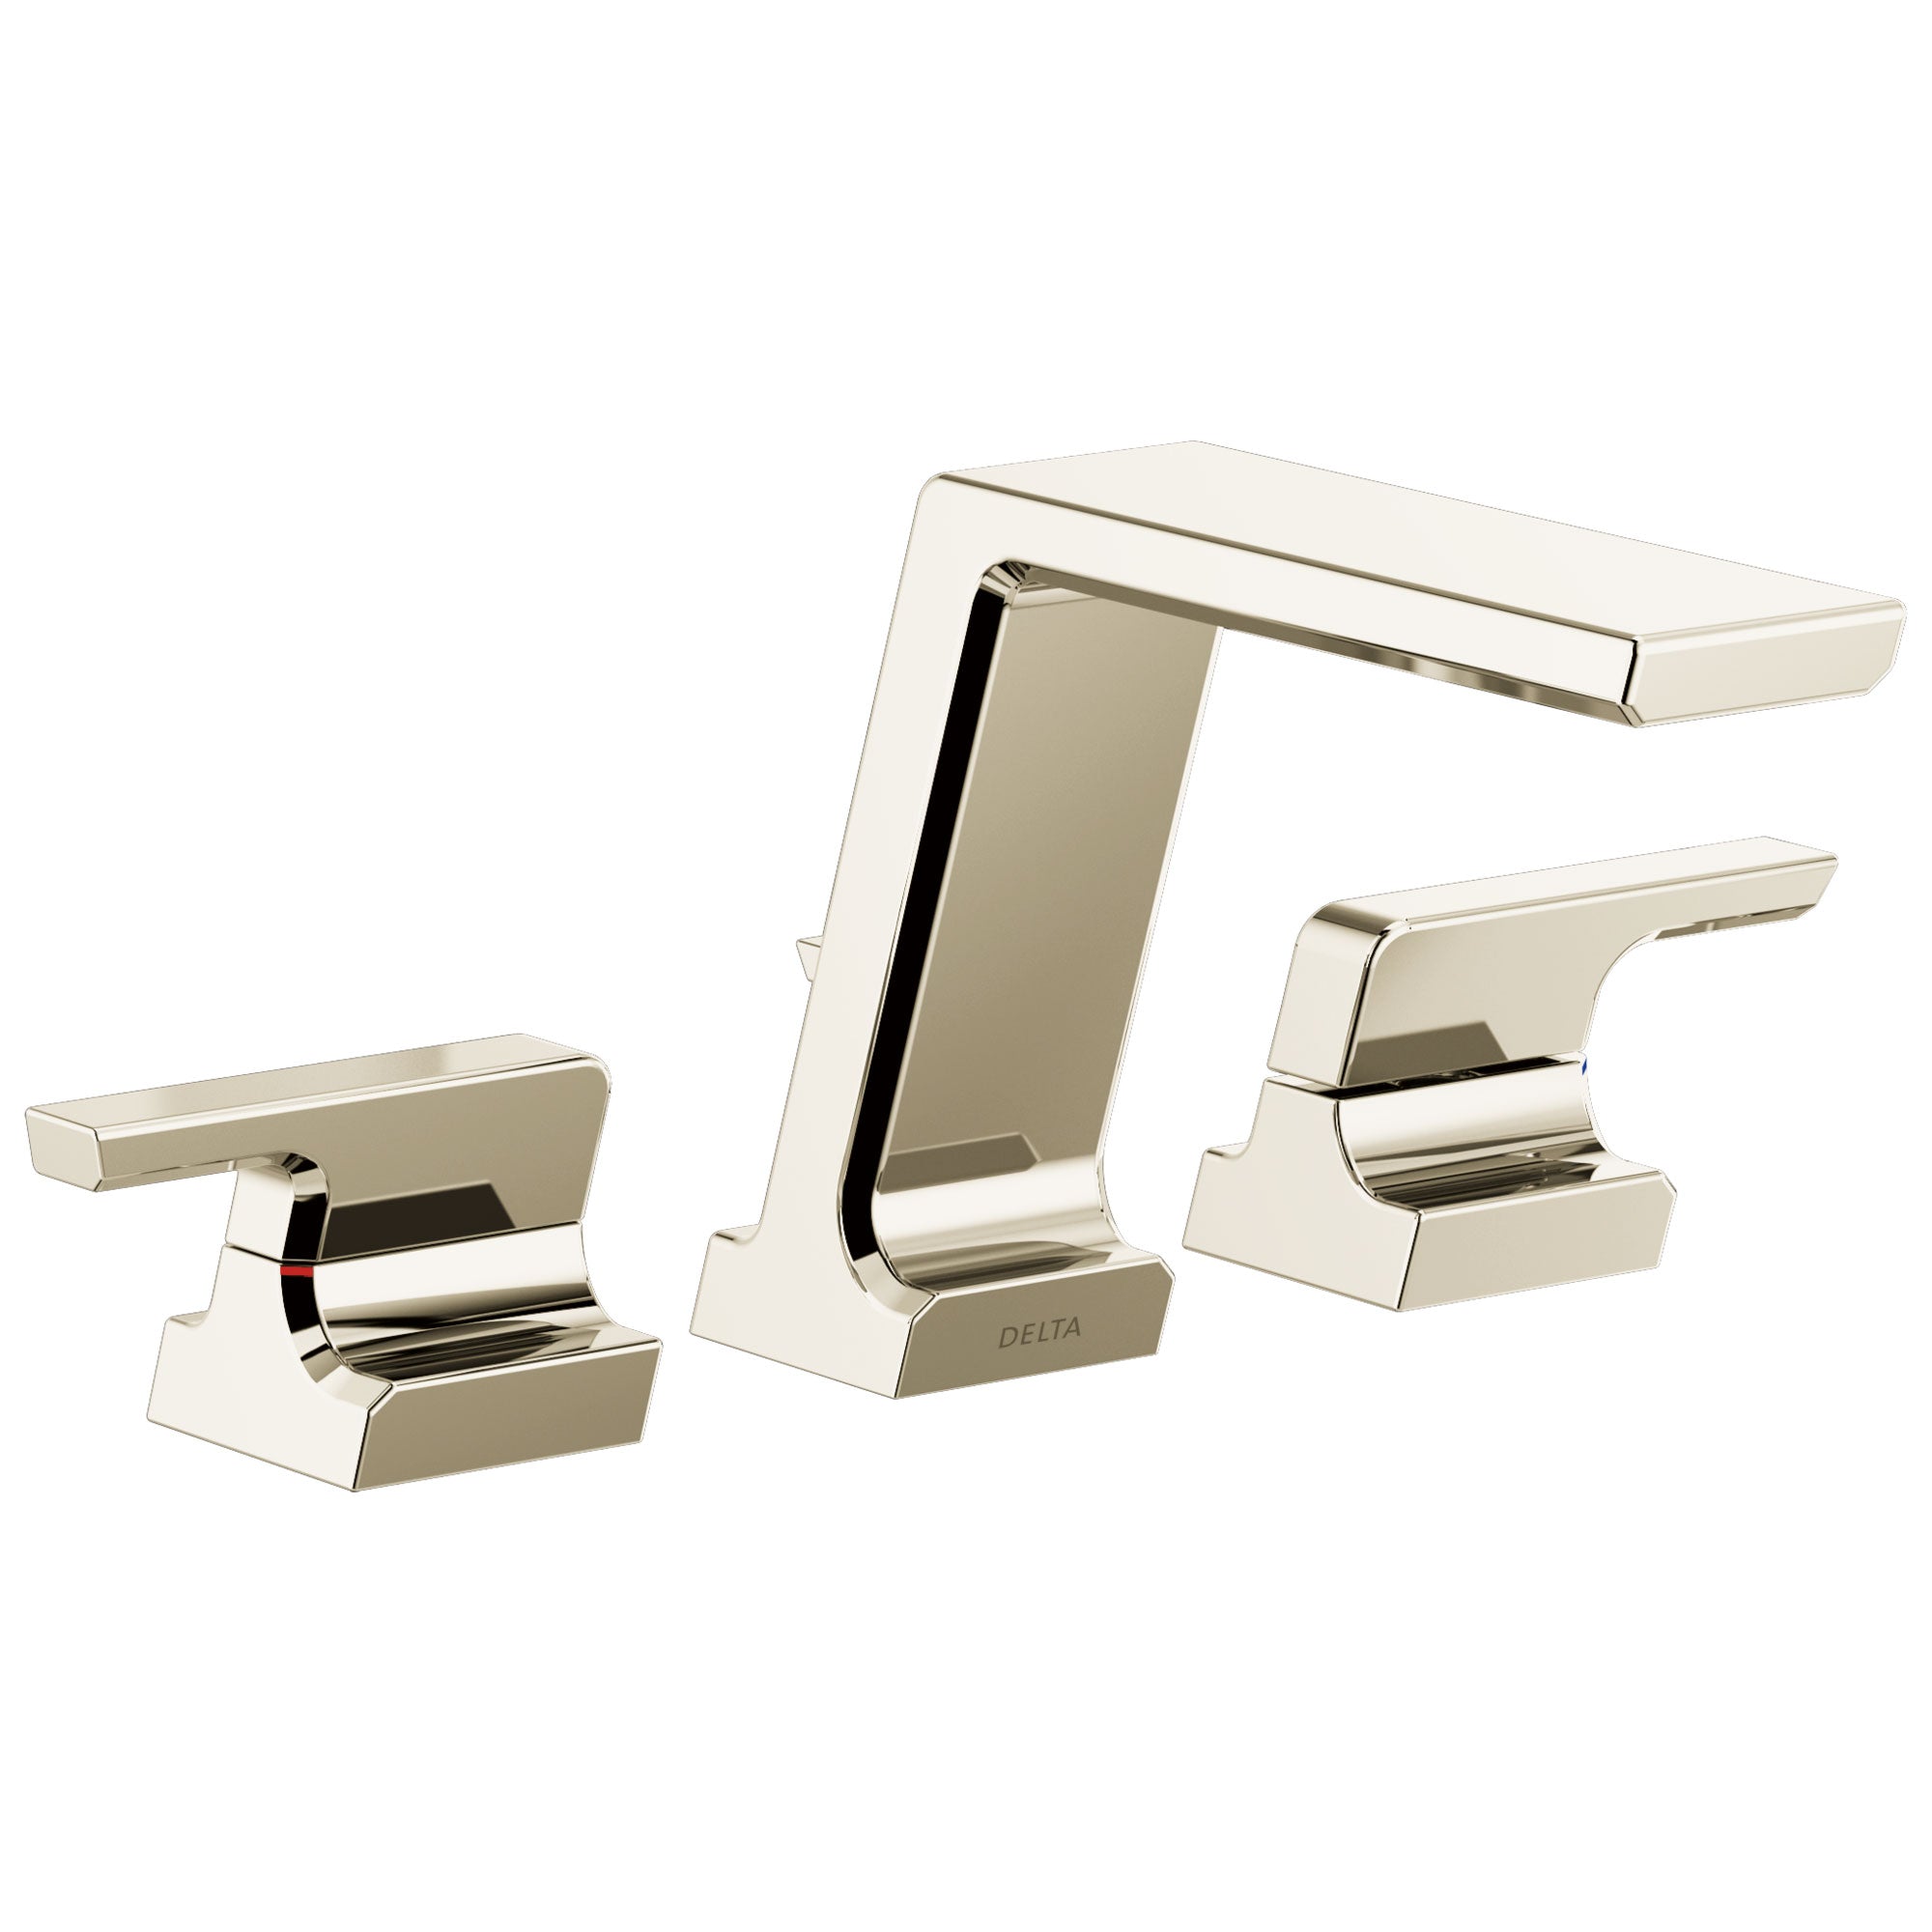 Delta Pivotal Modern Polished Nickel Finish Deck Mount Roman Tub Filler Faucet Includes Handles and Rough-in Valve D3110V